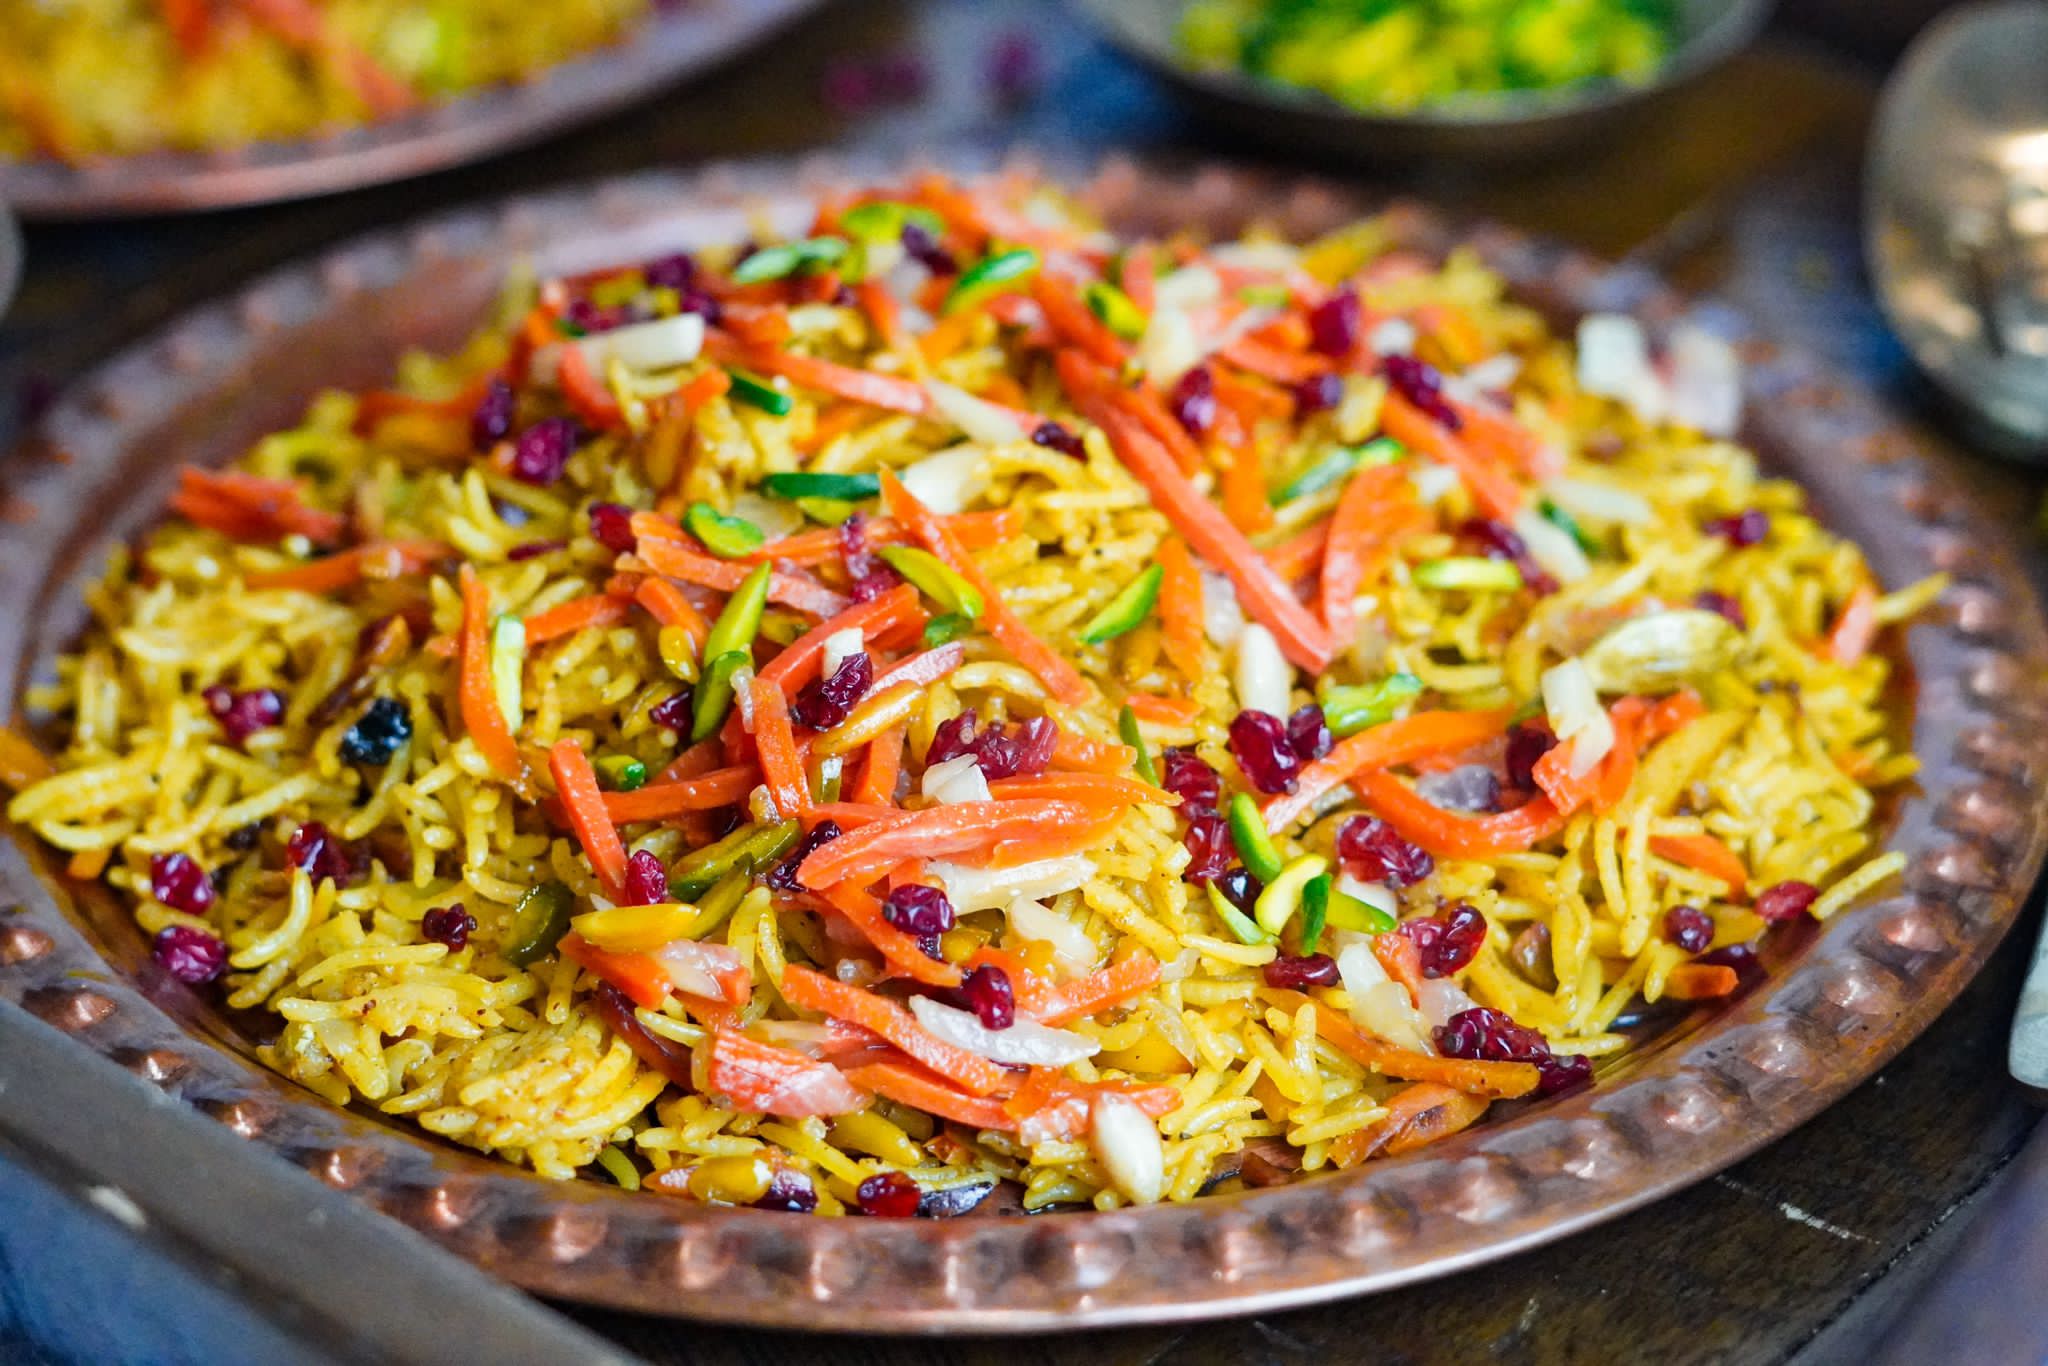 A dish of Persian jeweled rice with toppings like carrots, pistachios, and almonds